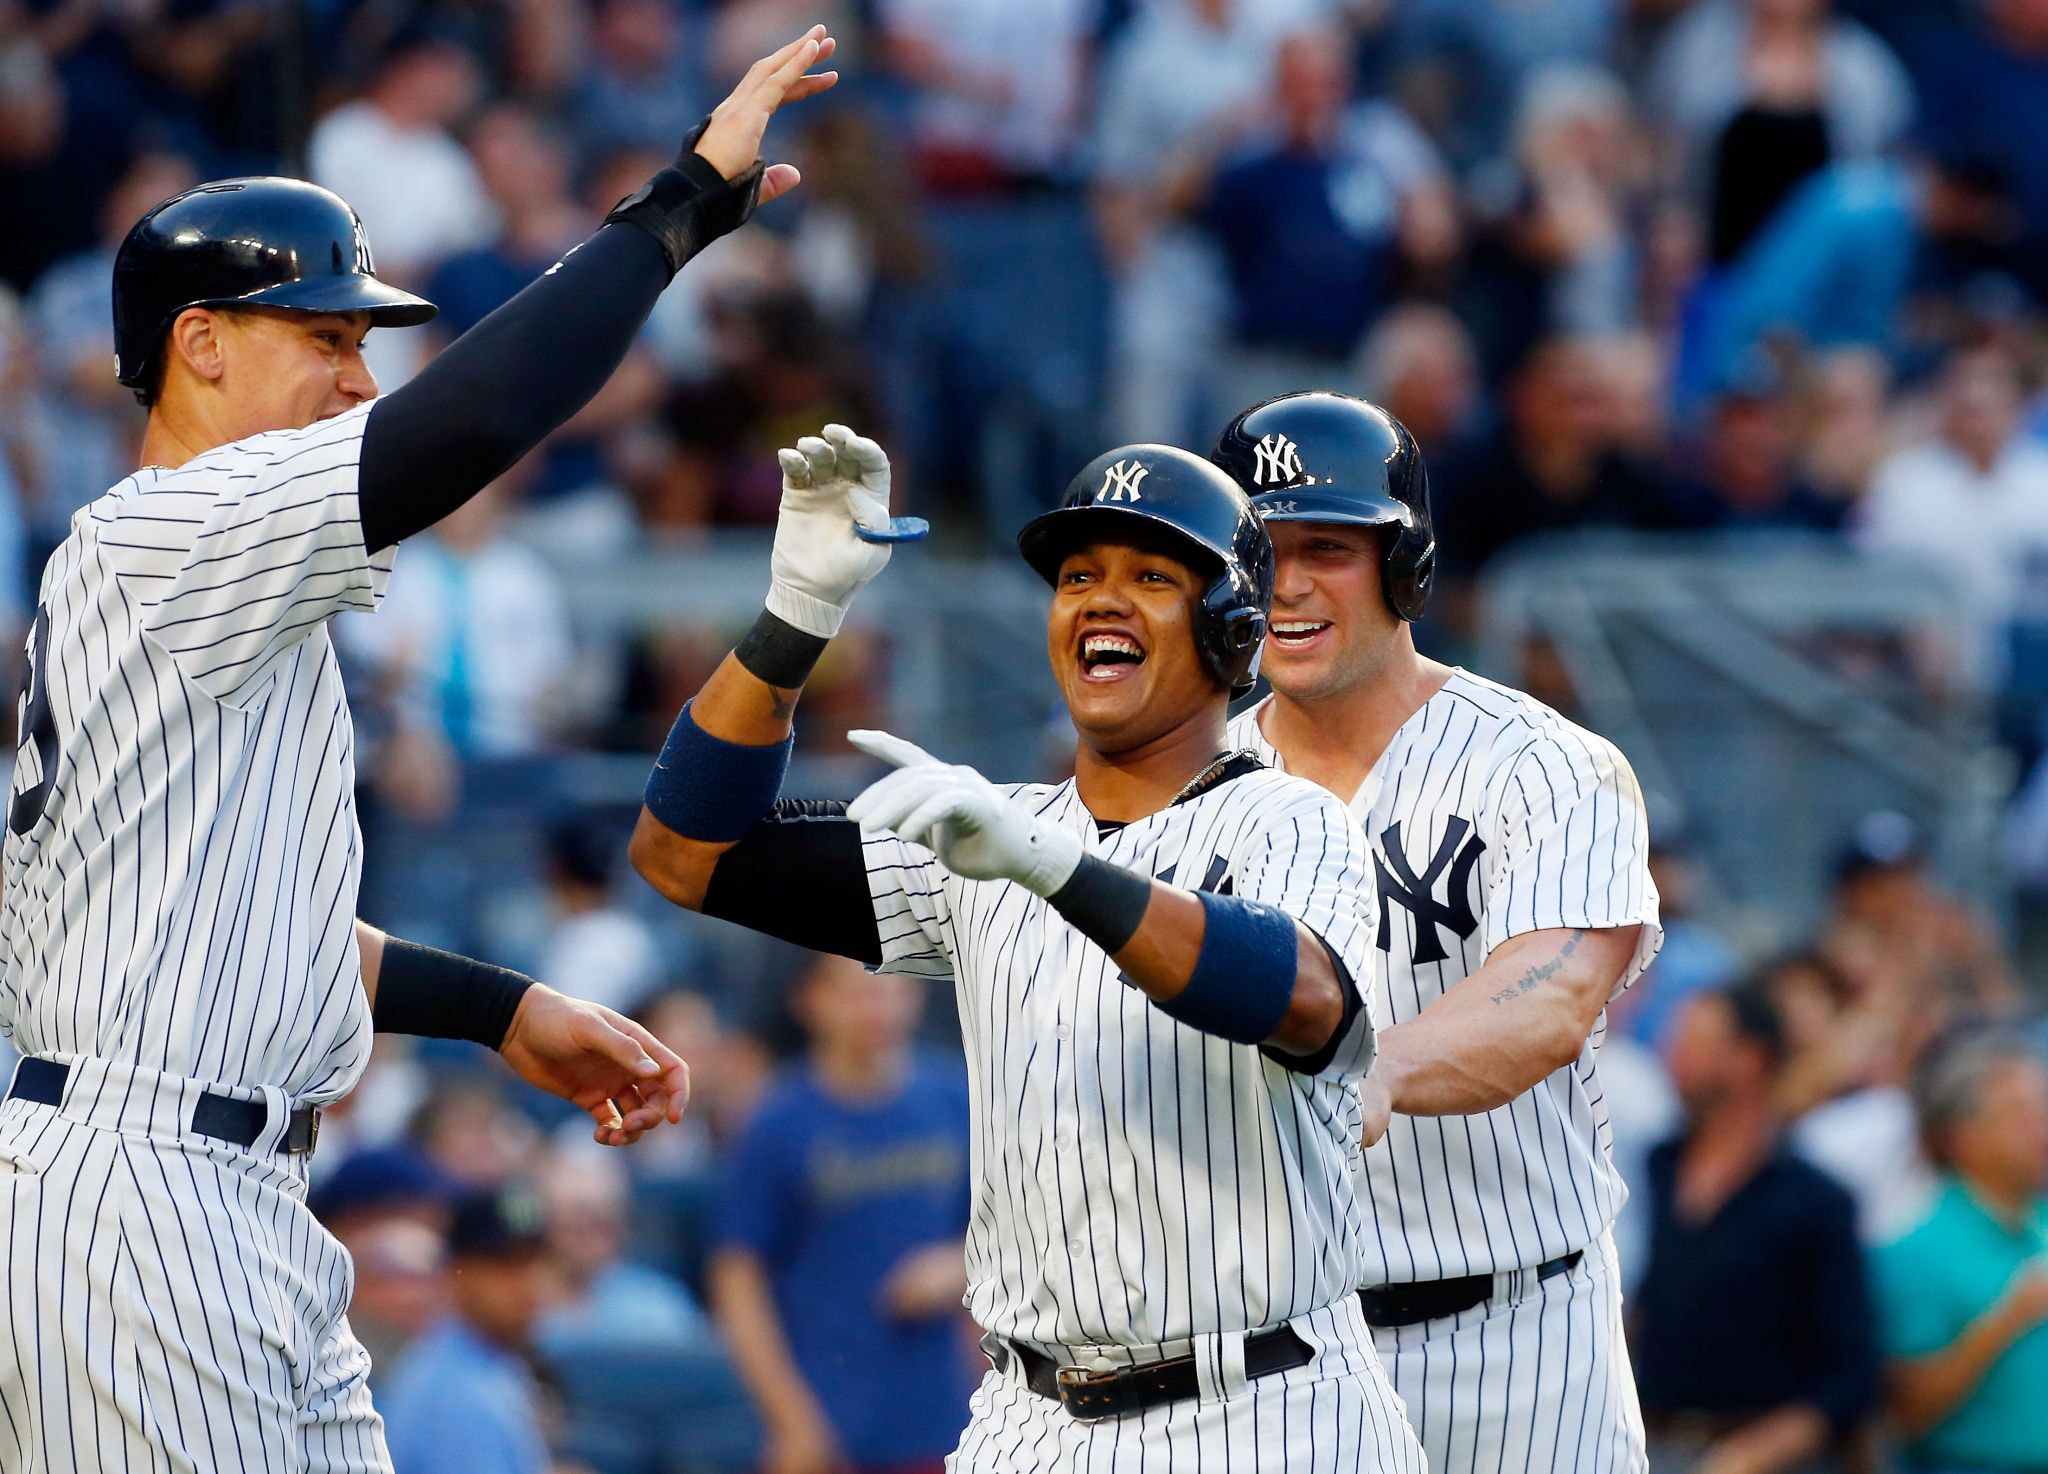 Yankees release ALCS roster that will face Astros